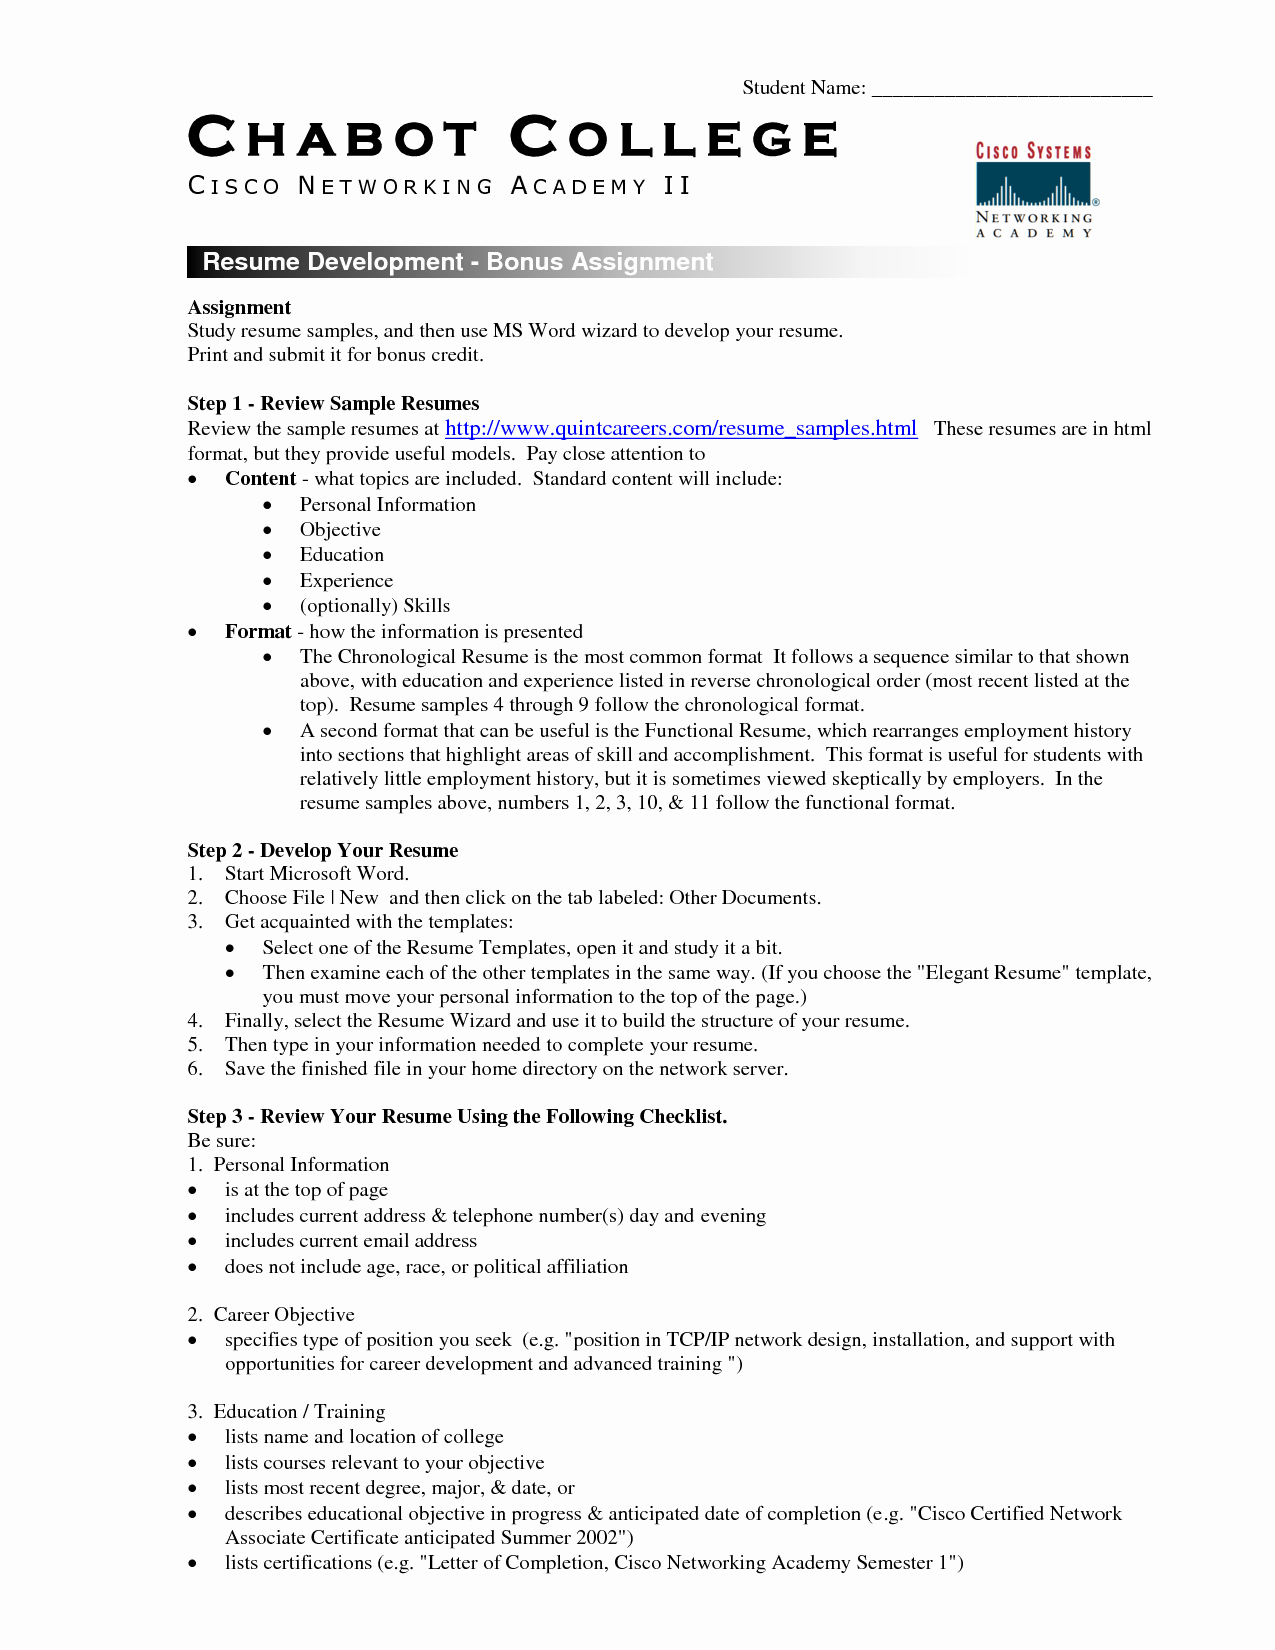 Resume format In Ms Word Inspirational College Student Resume Template Microsoft Word